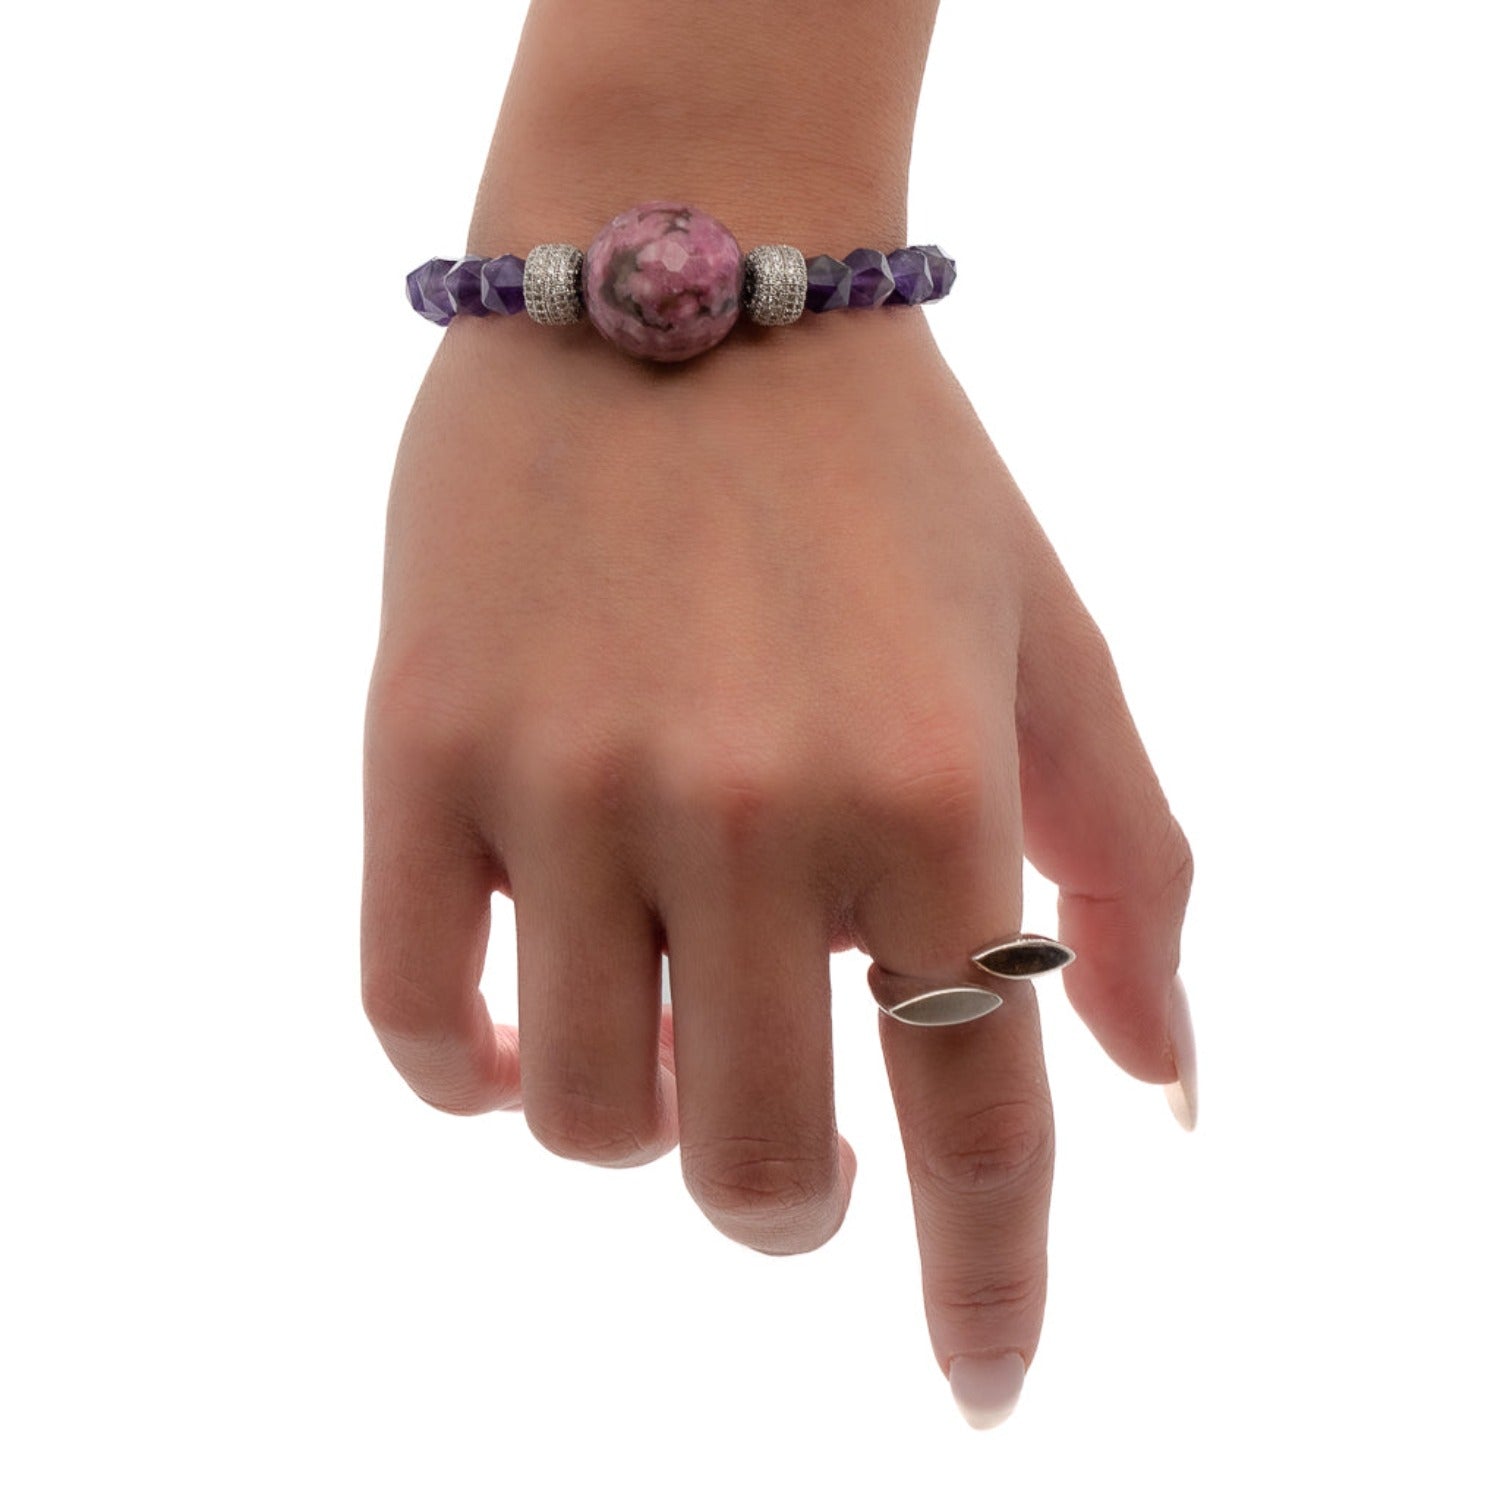 Experience the elegance of the Stylish Women Bracelet through the model's graceful presence, highlighting its natural amethyst stones and glamorous design.